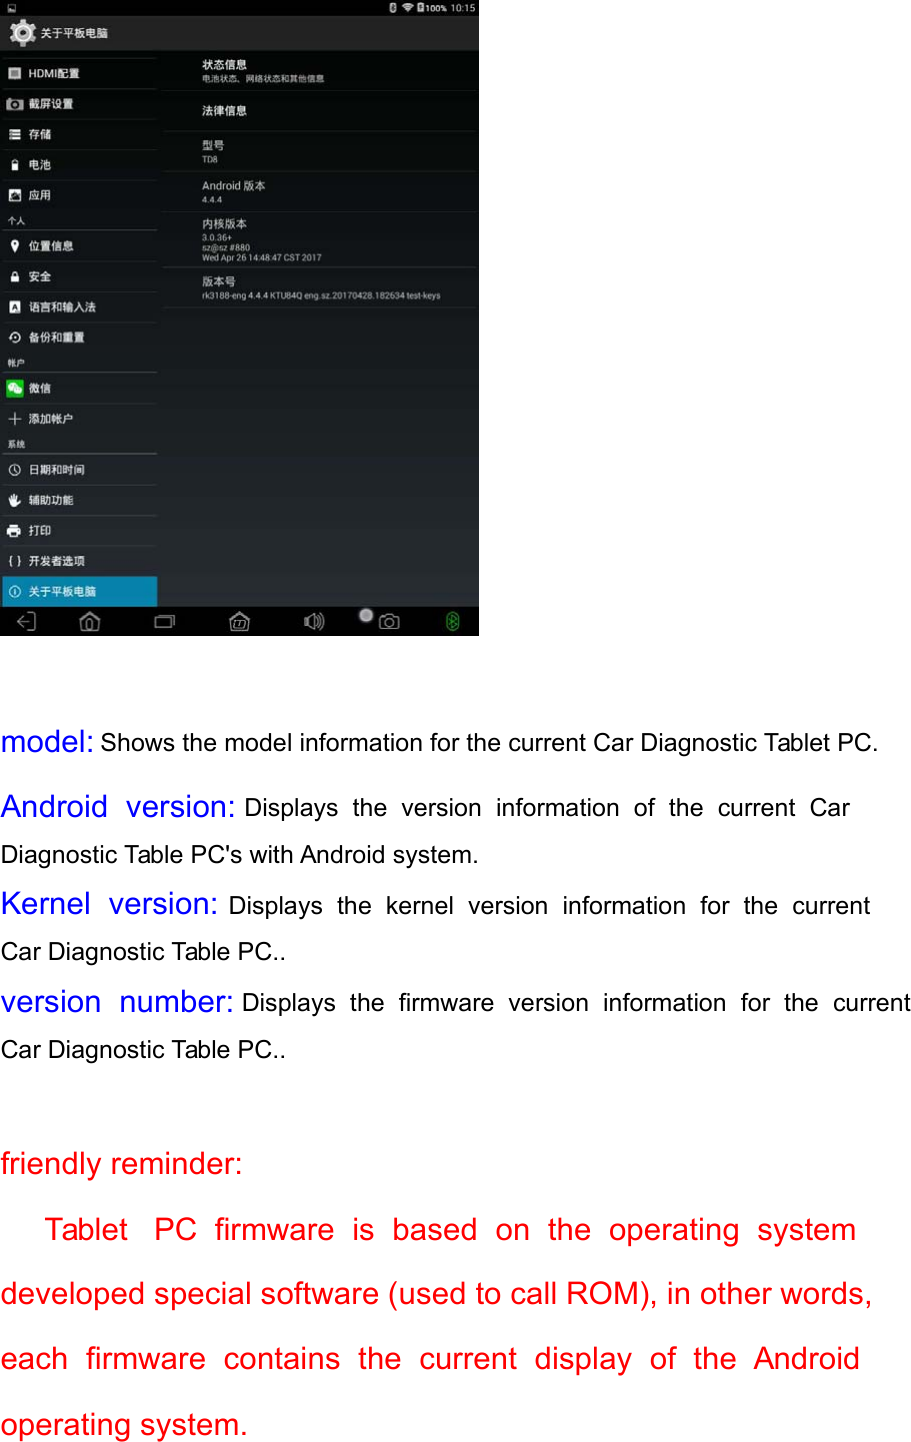    model: Shows the model information for the current Car Diagnostic Tablet PC. Android  version: Displays  the  version  information  of  the  current  Car Diagnostic Table PC&apos;s with Android system. Kernel  version: Displays  the  kernel  version  information  for  the  current Car Diagnostic Table PC.. version  number:  Displays  the  firmware  version  information  for  the  current Car Diagnostic Table PC..   friendly reminder:  Tablet   PC  firmware  is  based  on  the  operating  system  developed special software (used to call ROM), in other words, each  firmware  contains  the  current  display  of  the  Android  operating system. 